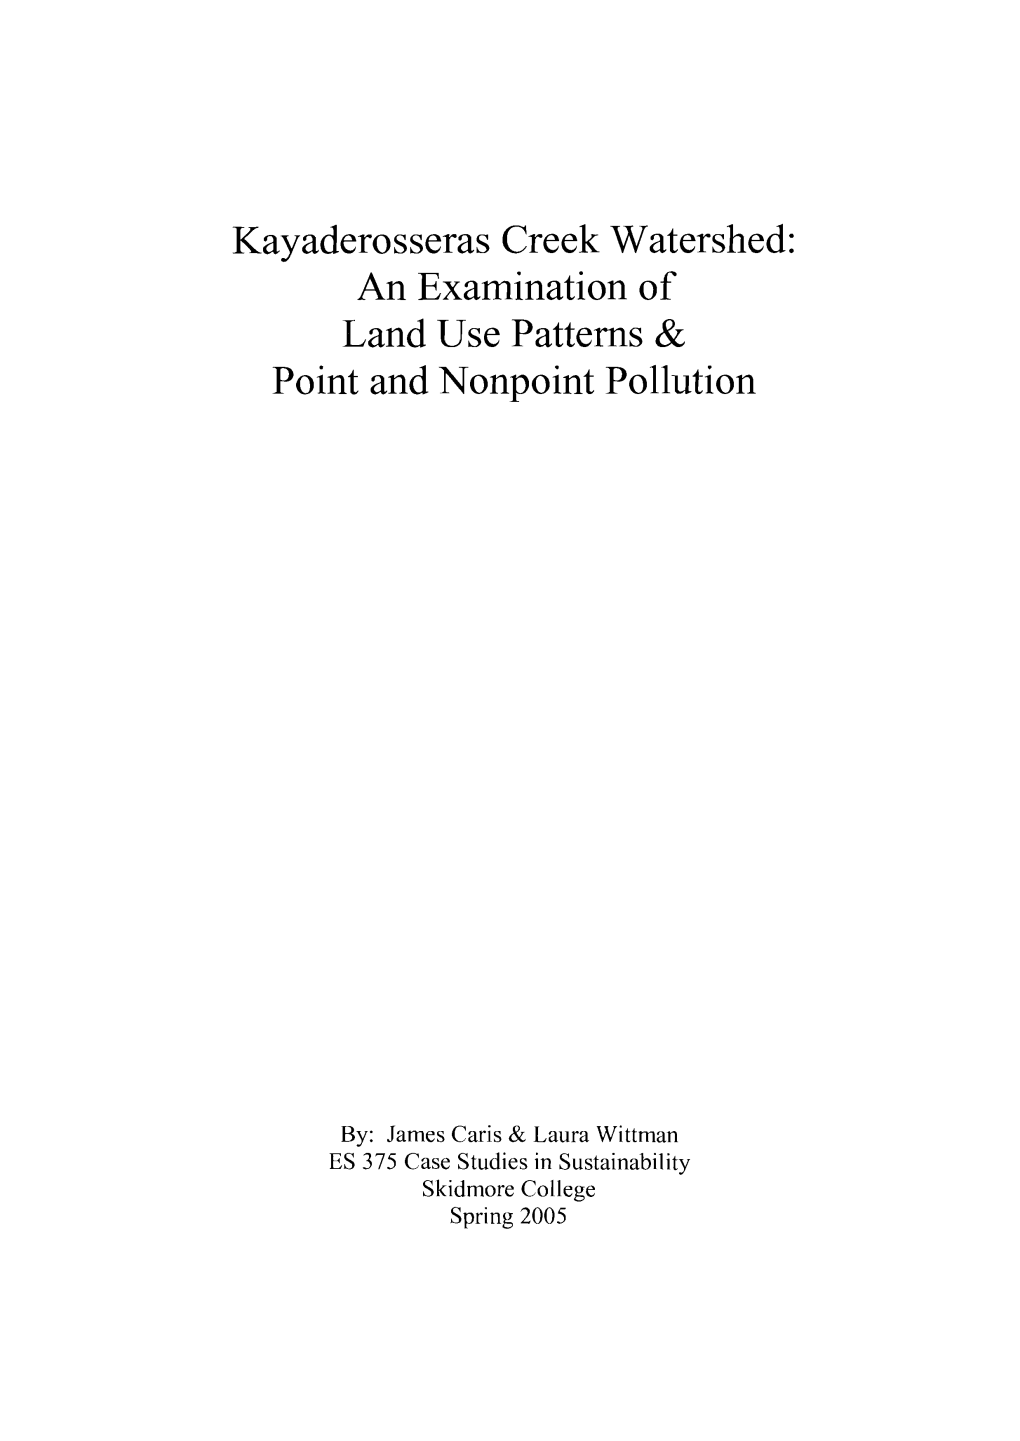 Kayaderosseras Creek Watershed: an Examination of Land Use Patterns & Point and Nonpoint Pollution